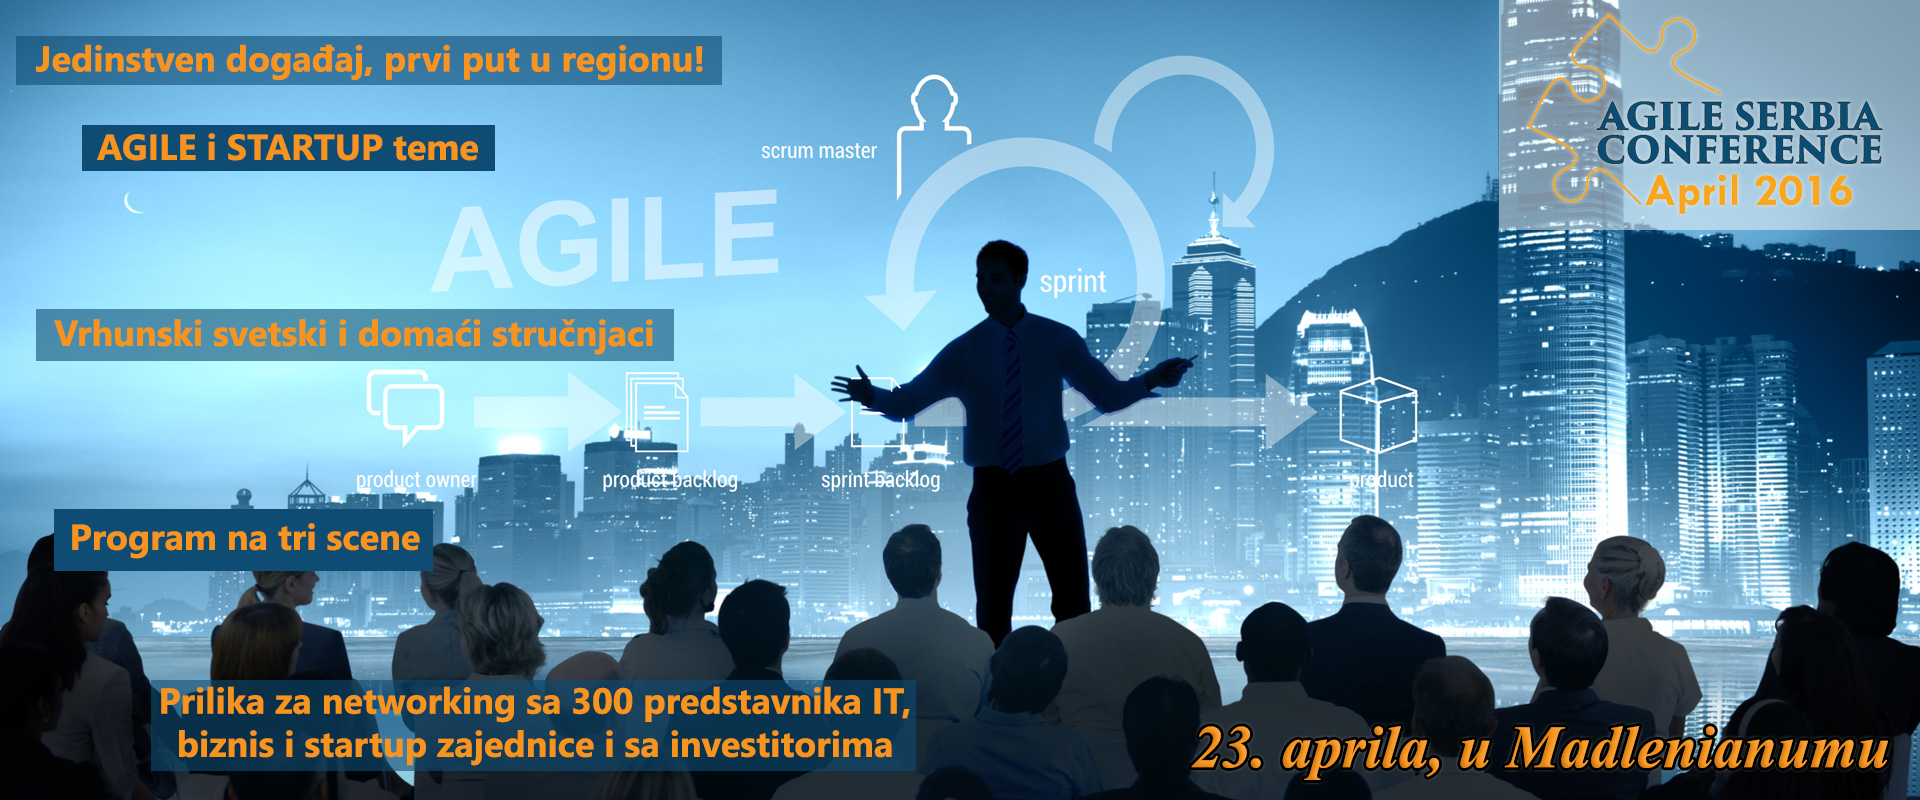 Reasons to come to the 1st Agile Serbia Conference